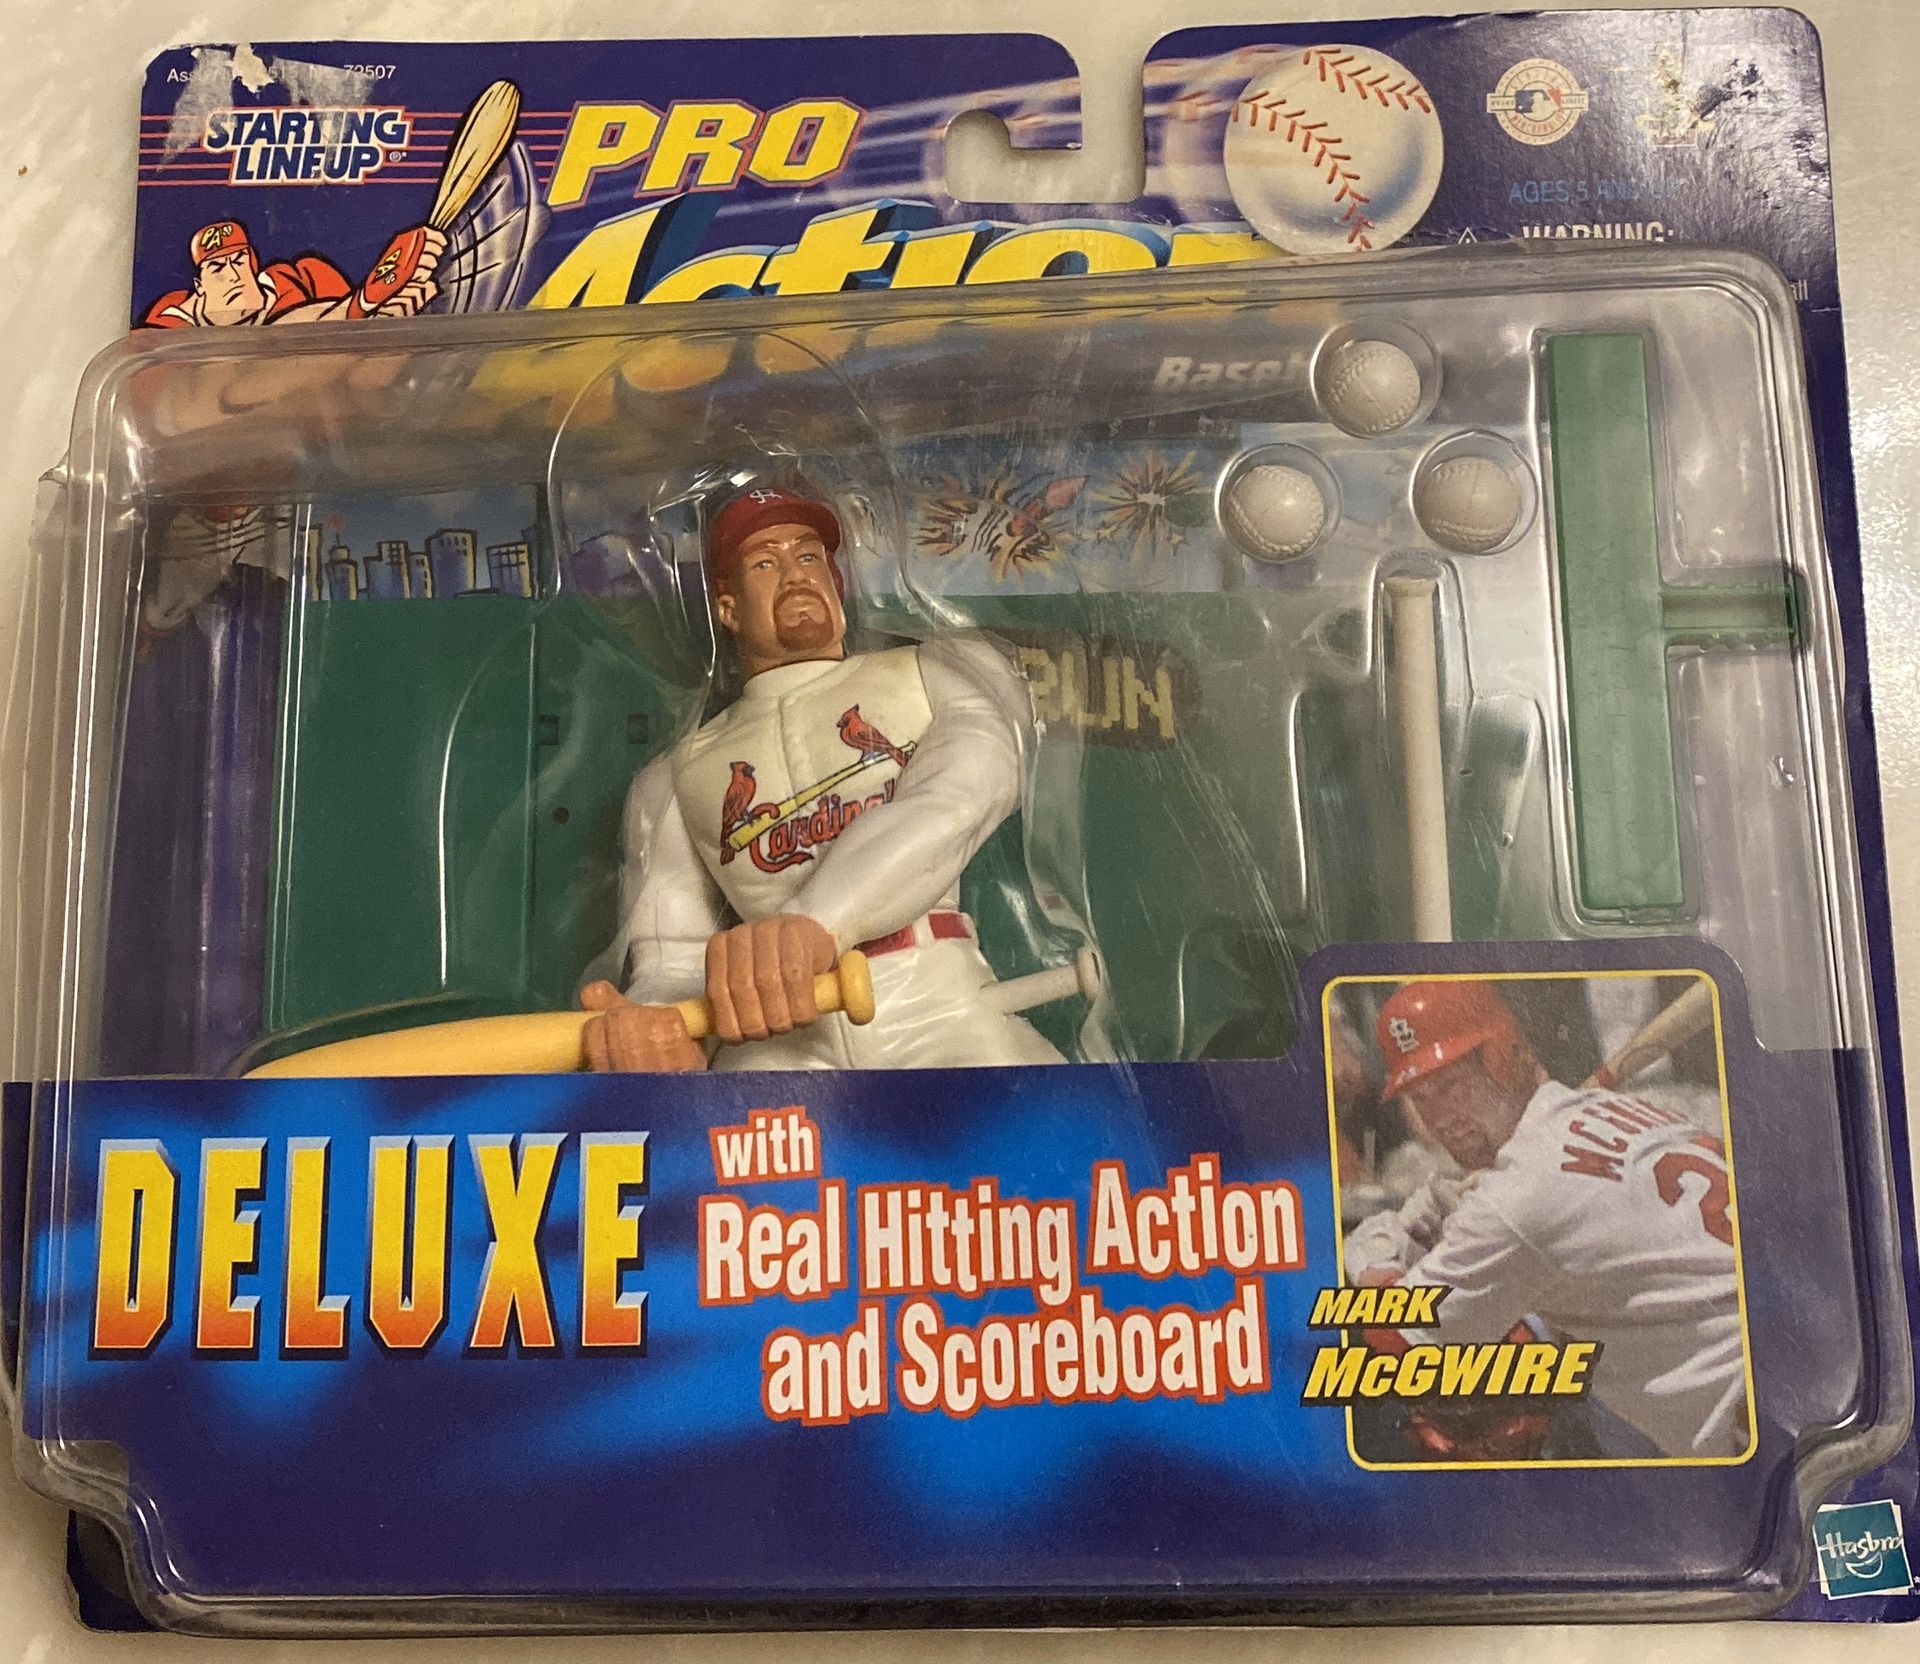 Mark McGwire Cardinals 1998 collectible toy